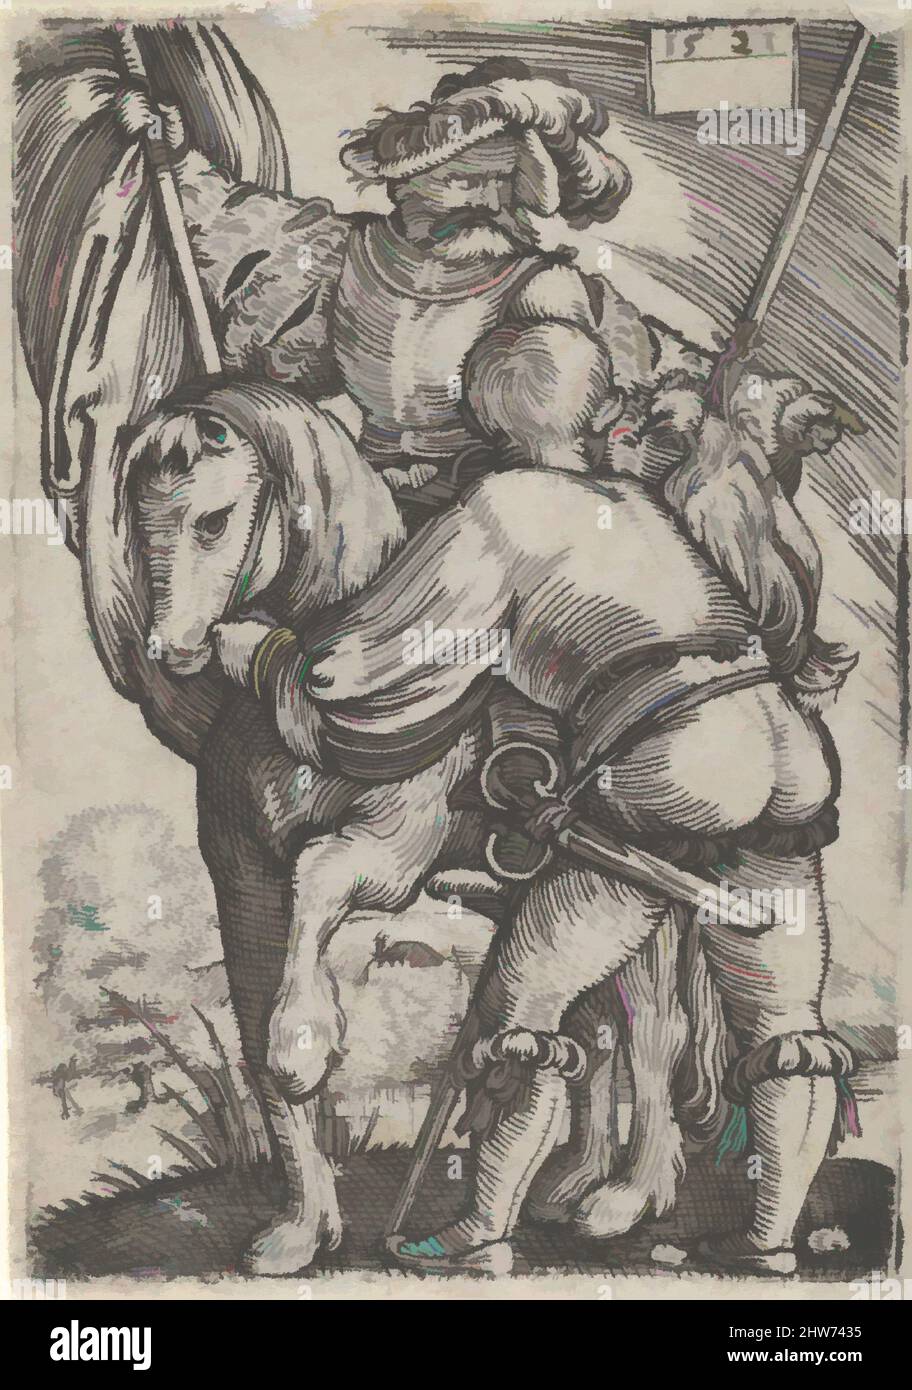 Art inspired by Riding Standard Bearer and a Foot Soldier, early 16th century, Engraving, Prints, Barthel Beham (German, Nuremberg ca. 1502–1540 Italy, Classic works modernized by Artotop with a splash of modernity. Shapes, color and value, eye-catching visual impact on art. Emotions through freedom of artworks in a contemporary way. A timeless message pursuing a wildly creative new direction. Artists turning to the digital medium and creating the Artotop NFT Stock Photo